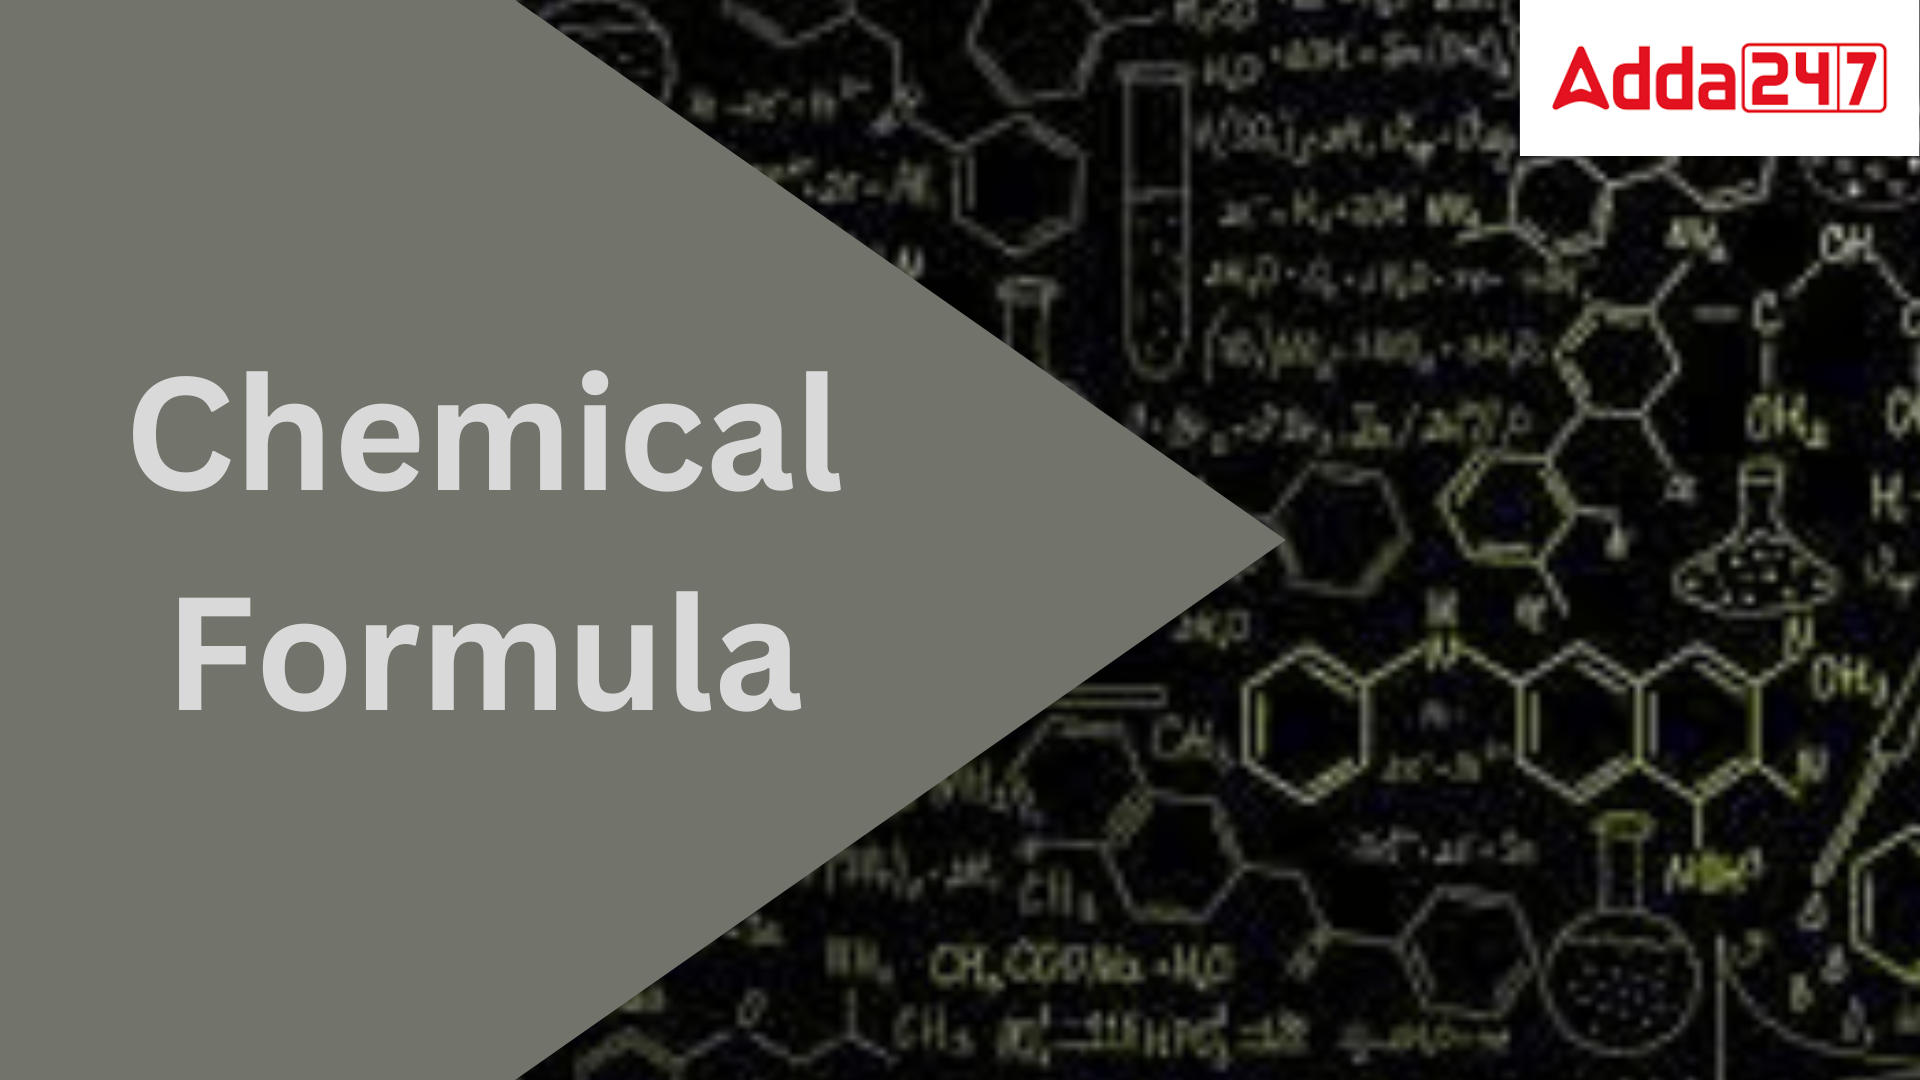 chemical compounds formulas and names